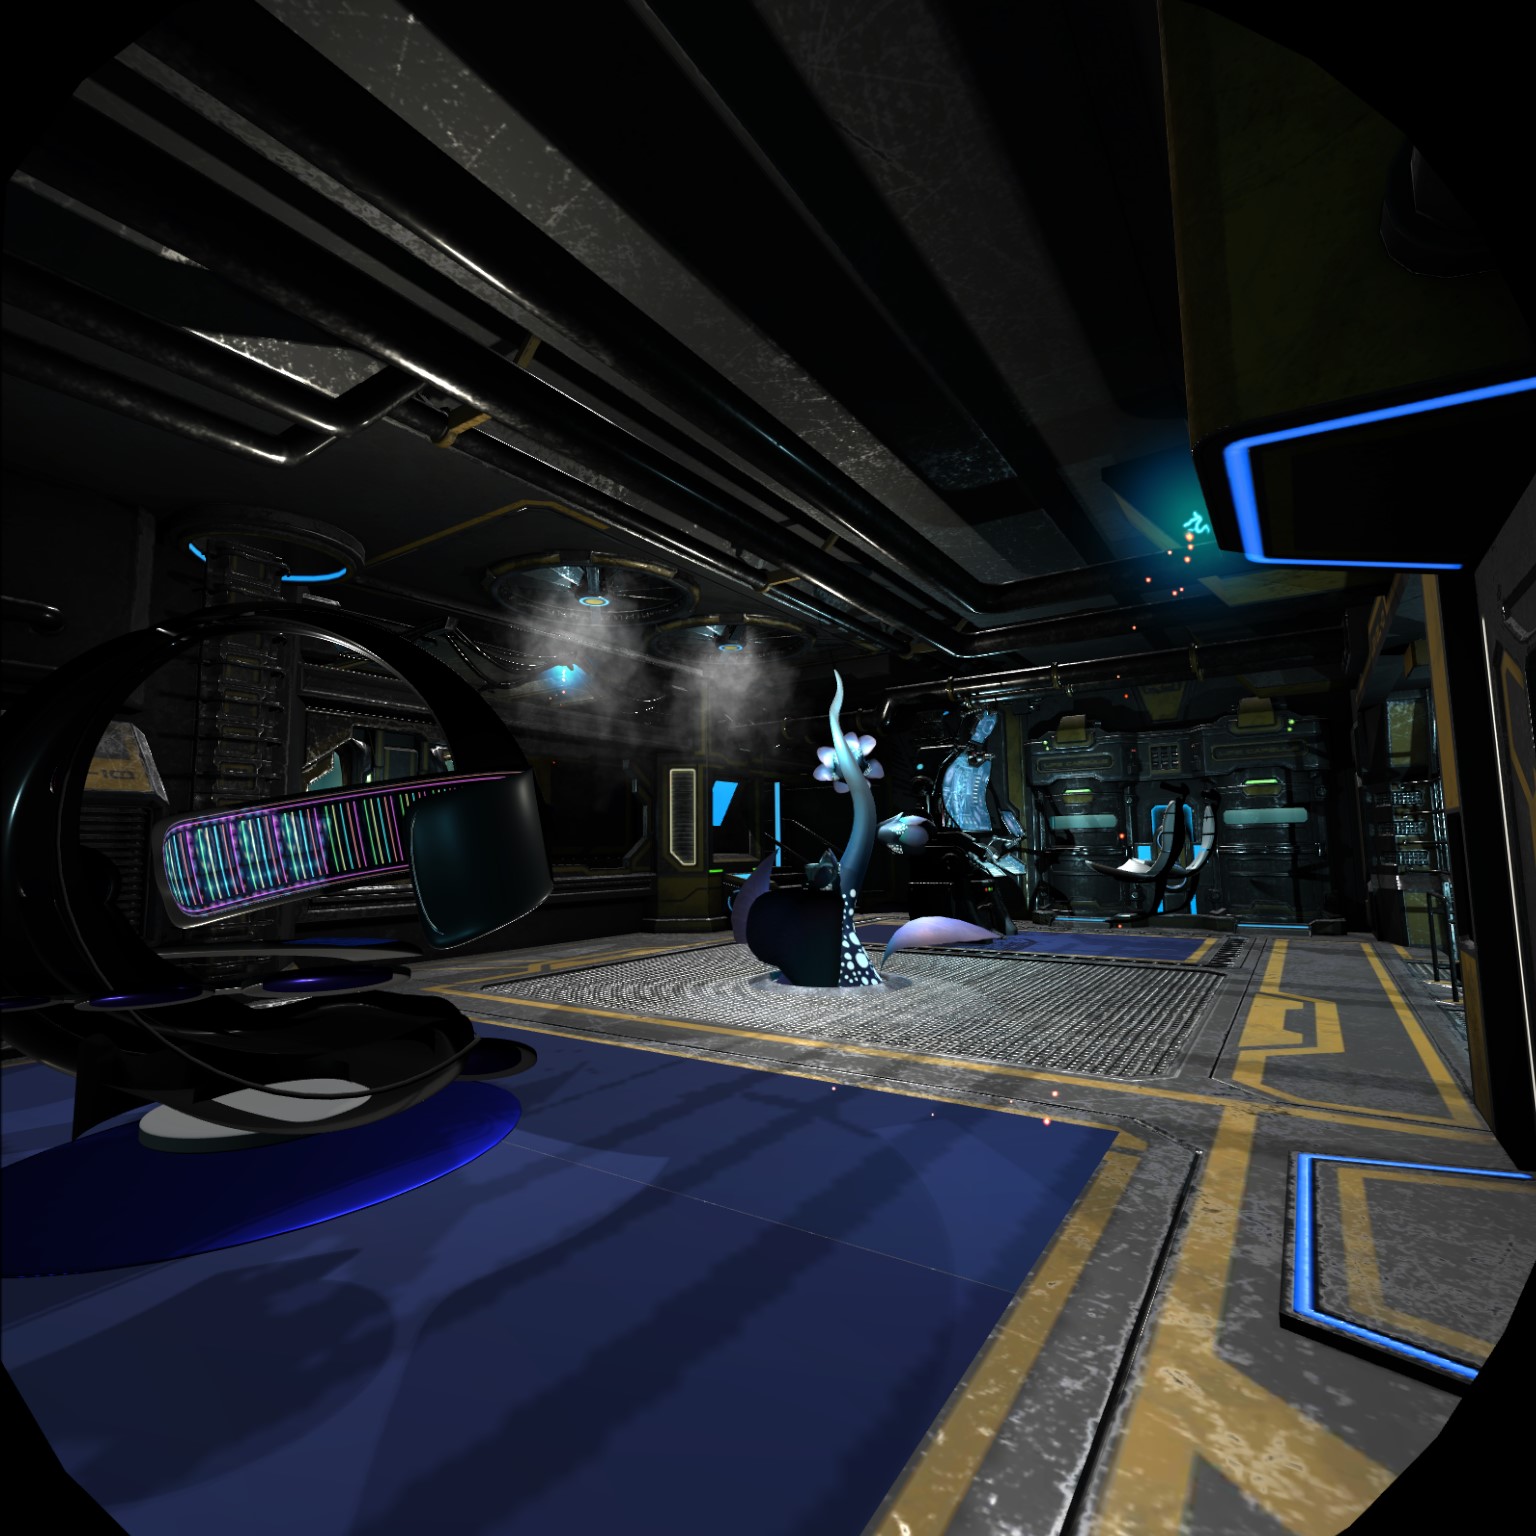 Quest Room Photo 2: Prototype of a room where technologies transport users on galaxy quests from a different angle.